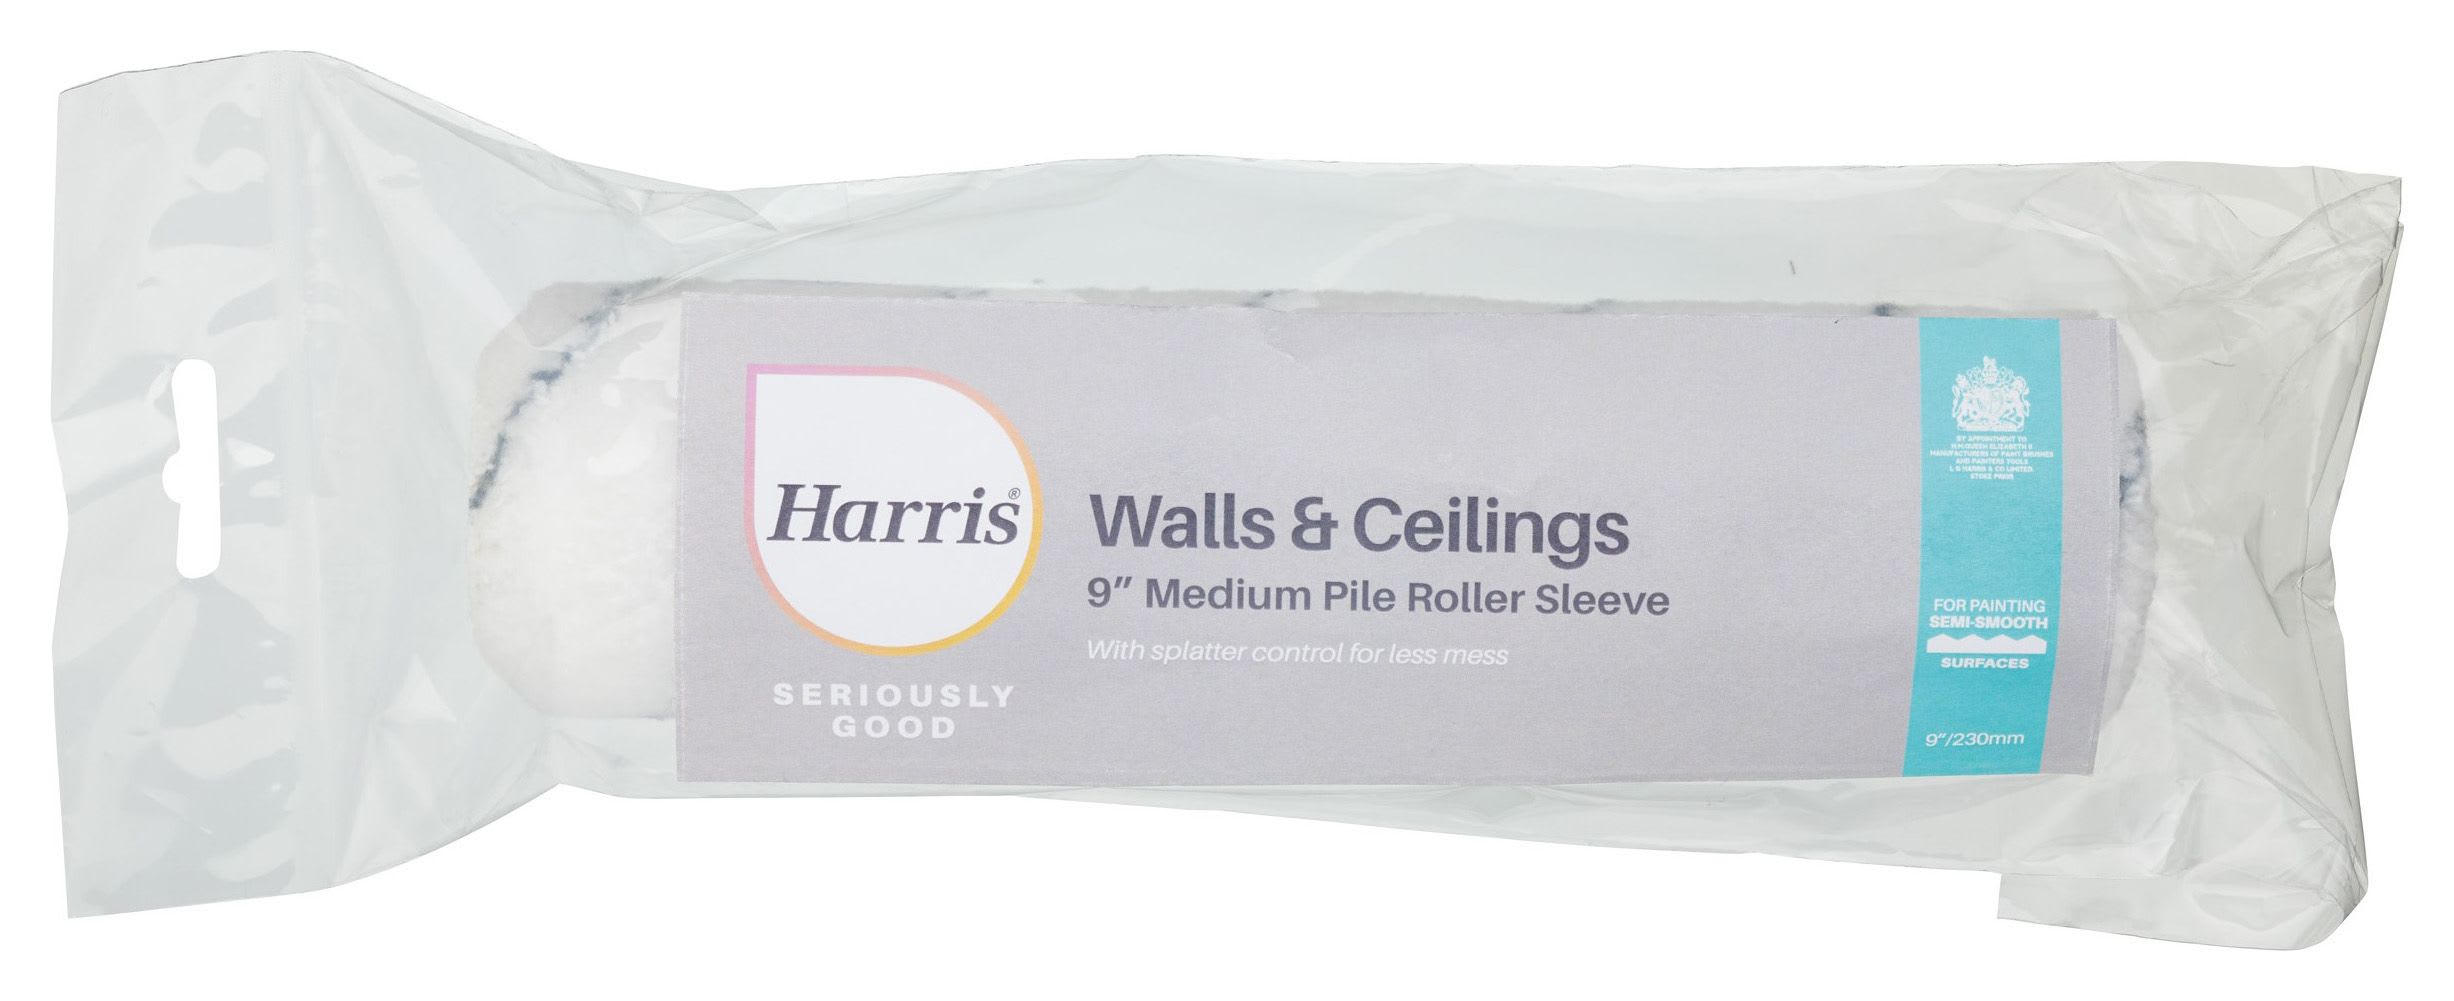 Harris Seriously Good Walls & Ceiling Paint Roller